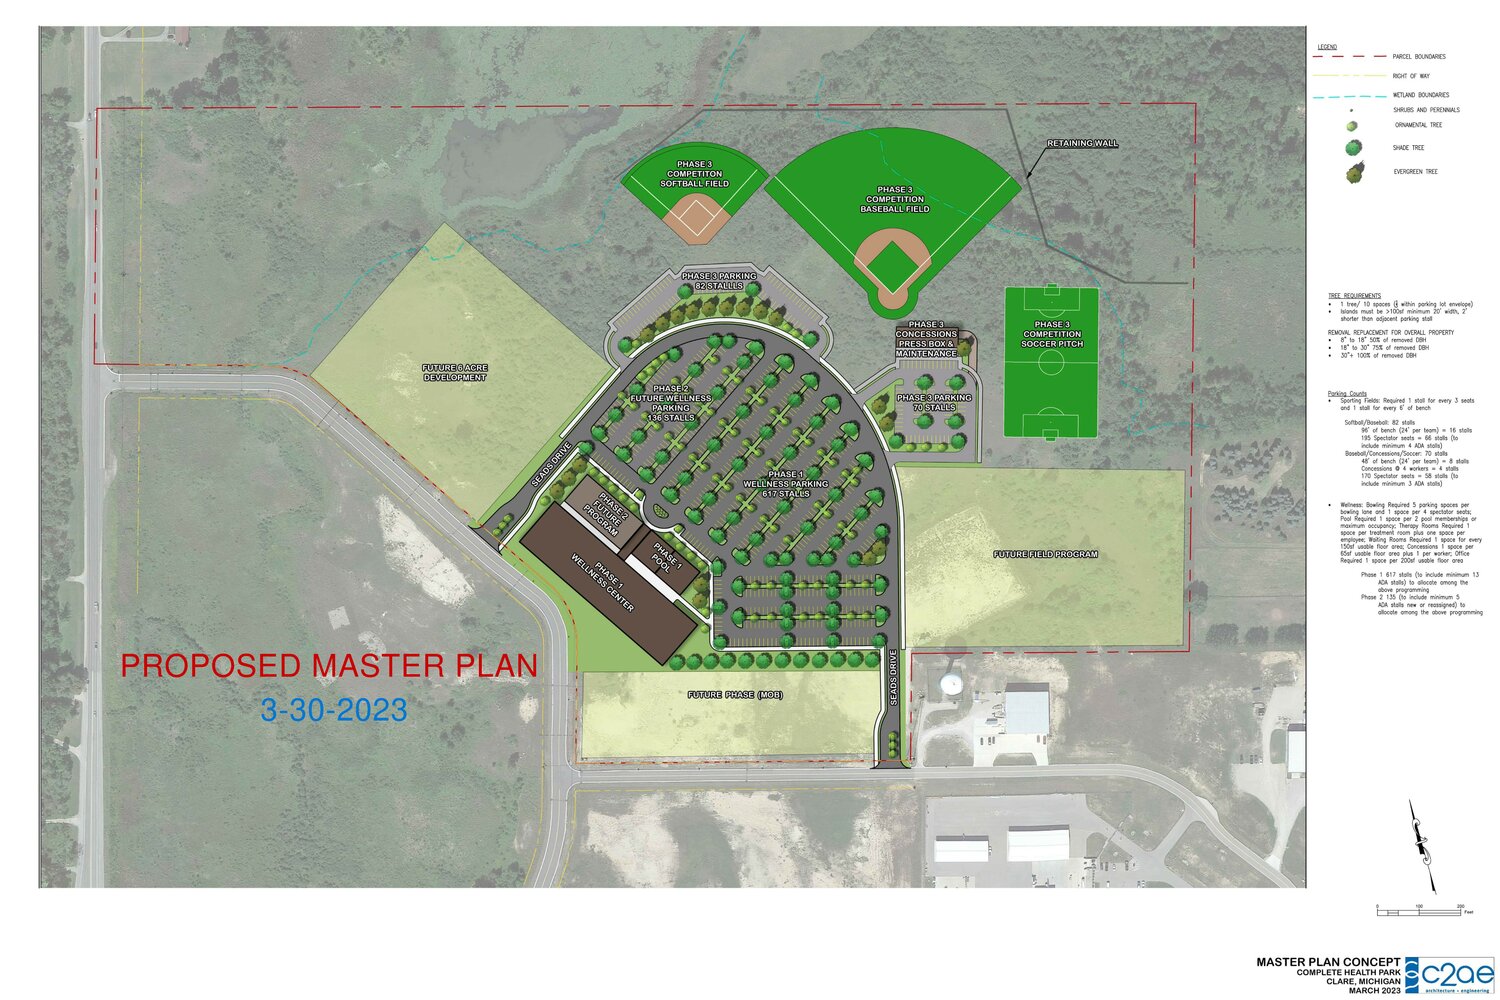 Proposed master plan concept for the Complete Health Campus. North Clare Ave borders the property on the left and the City of Clare water tower is the white circle in the lower right corner. The plan follows local zoning with ample parking and one tree for every ten parking spaces.